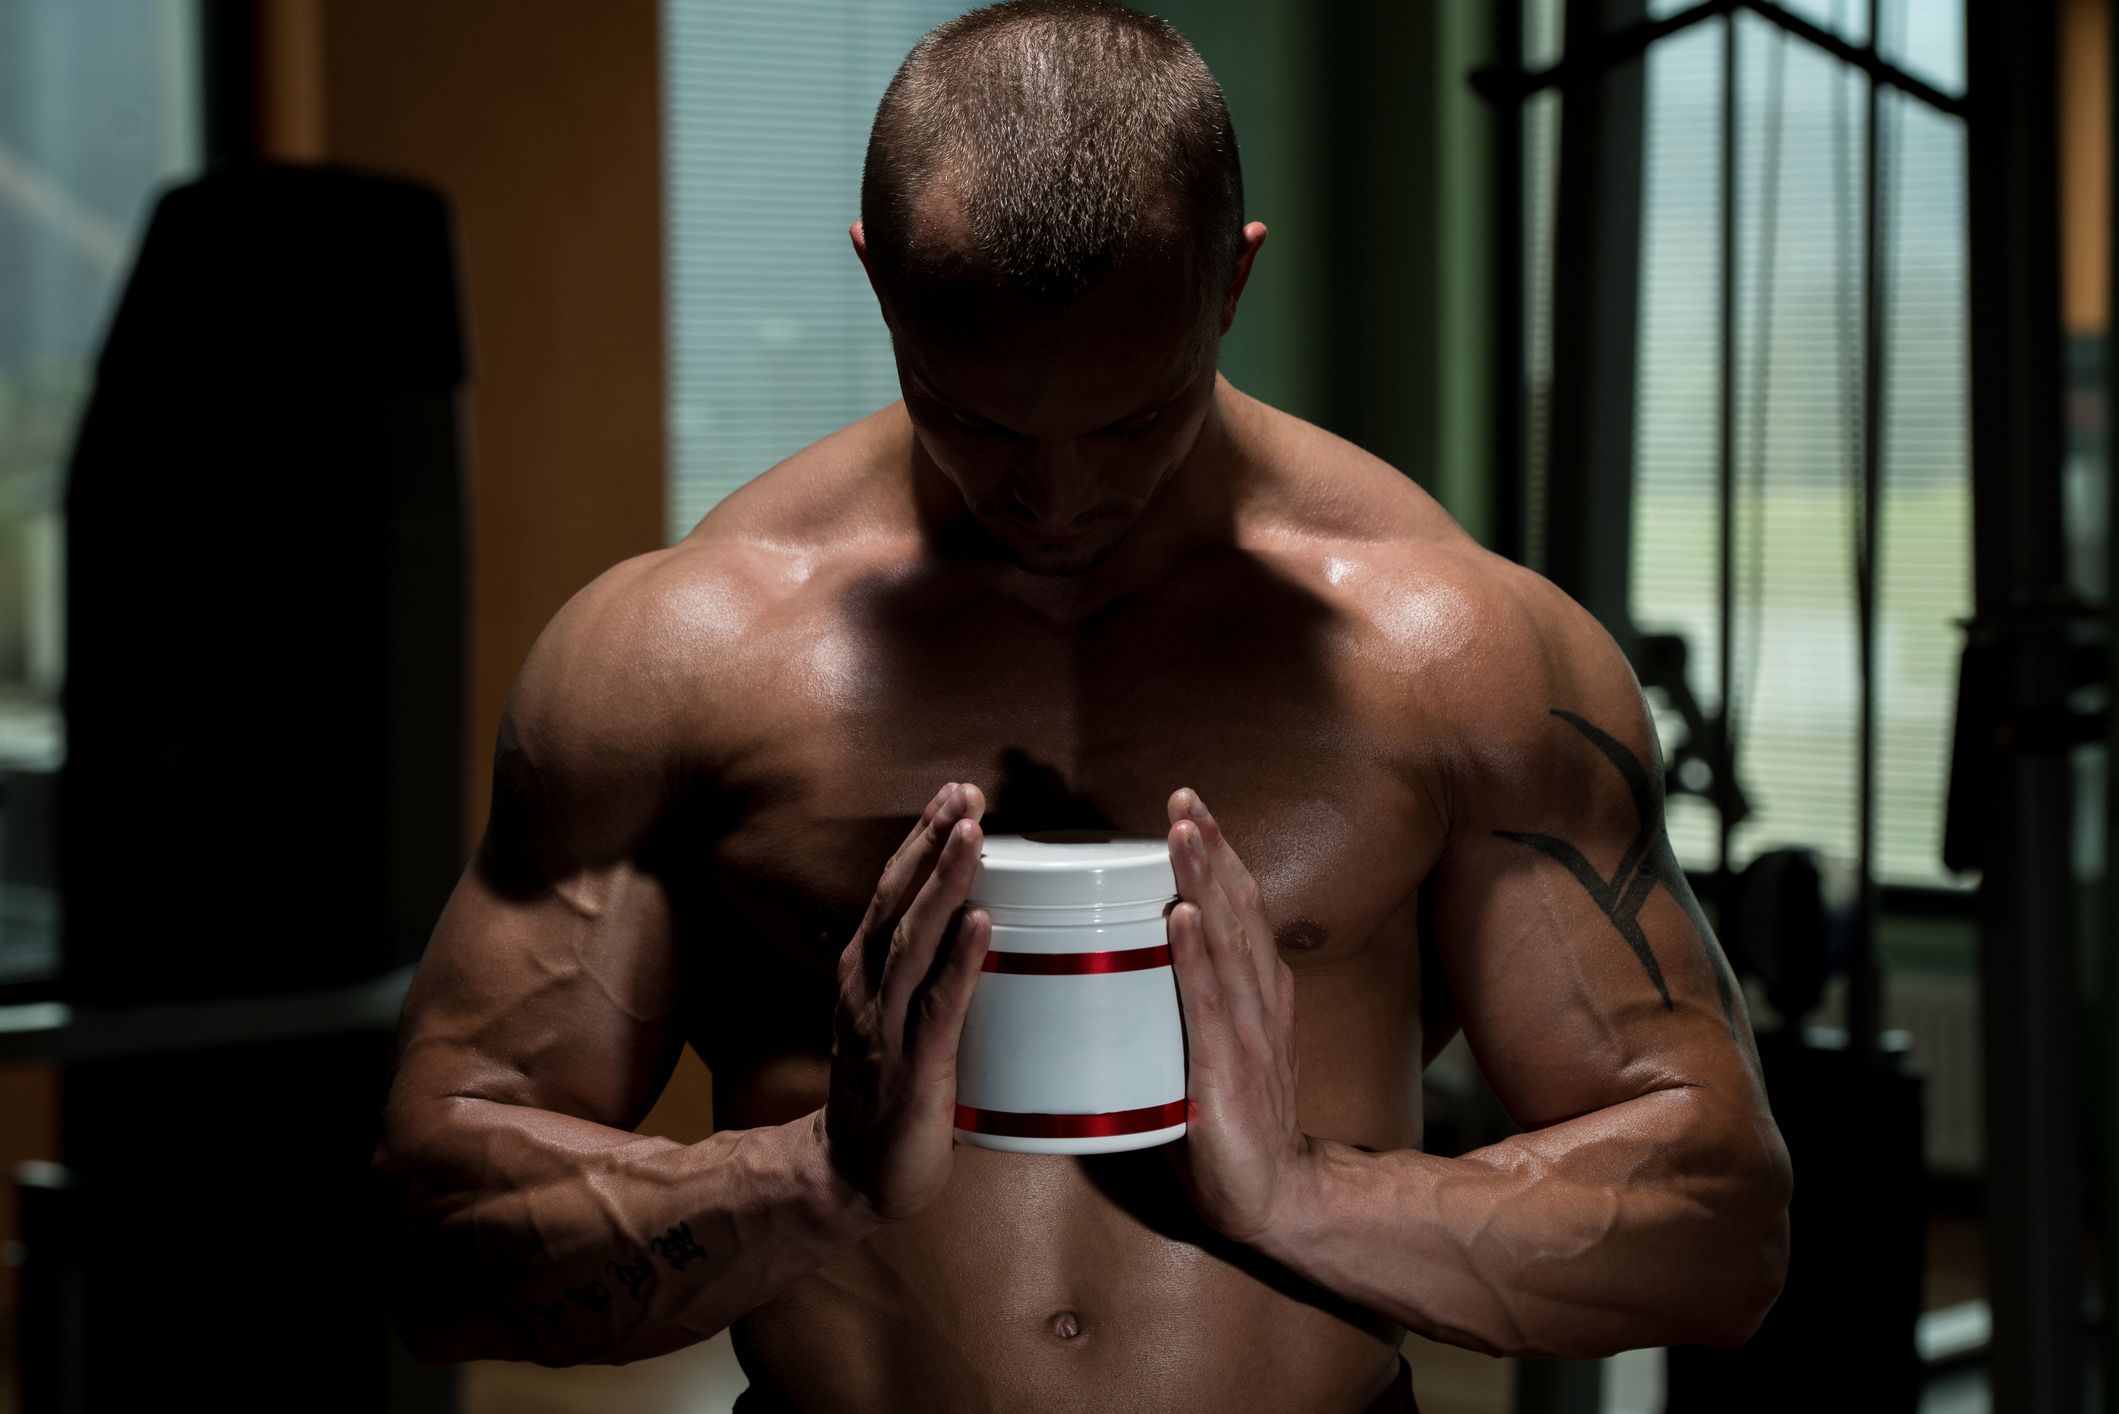 What Is Beta Alanine? Benefits & Side Effects of the Supplement